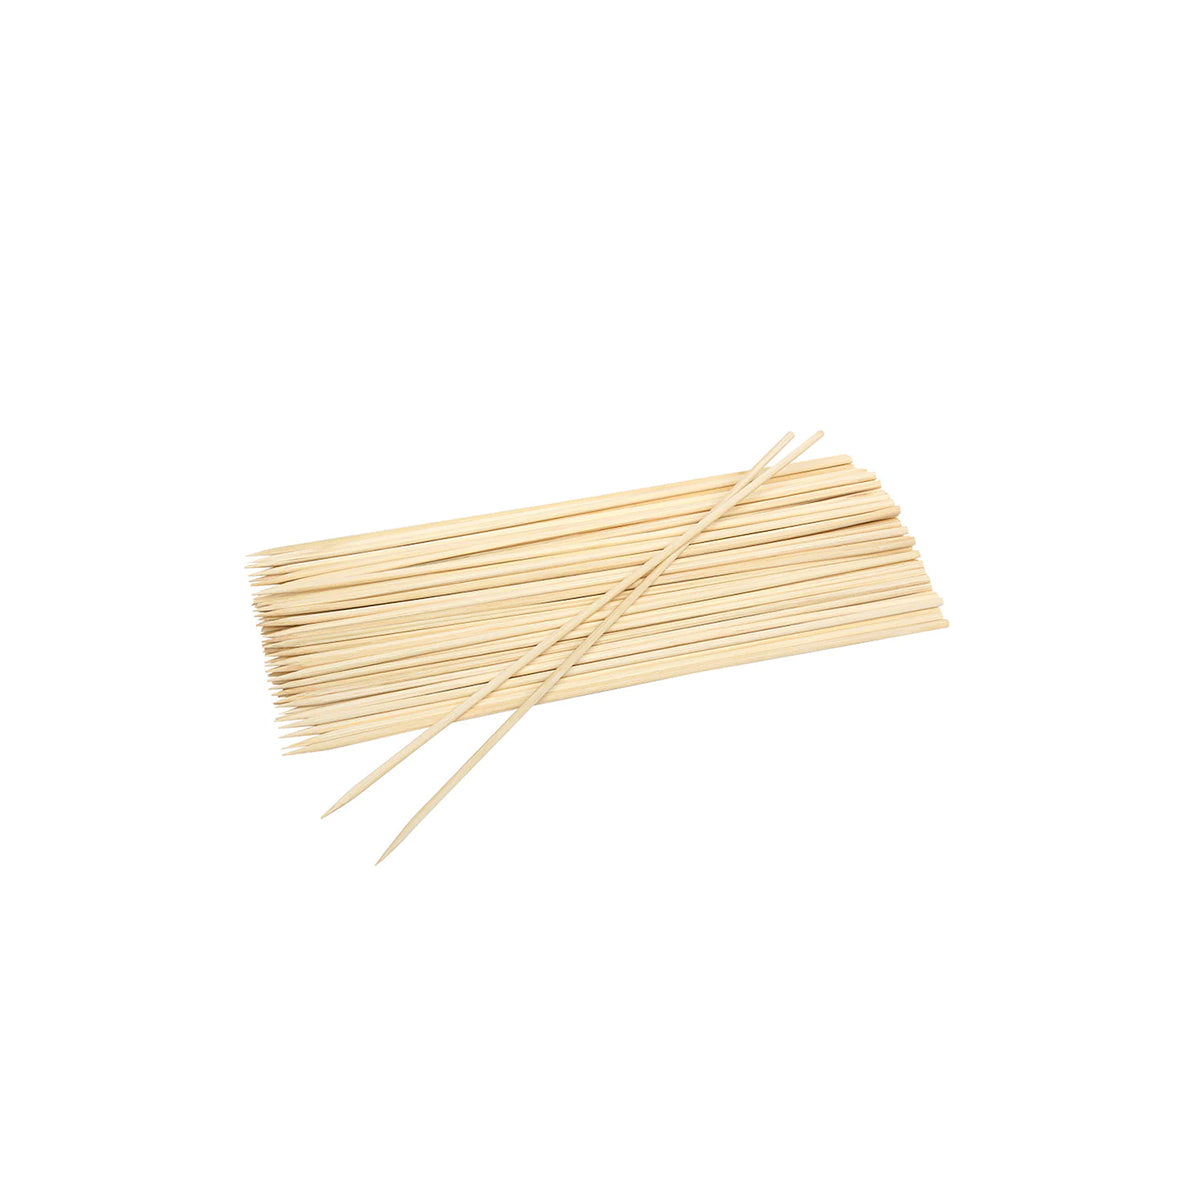 WLT43192 Wiltshire Bamboo Skewers 300mm Pack Of 80 Tomkin Australia Hospitality Supplies